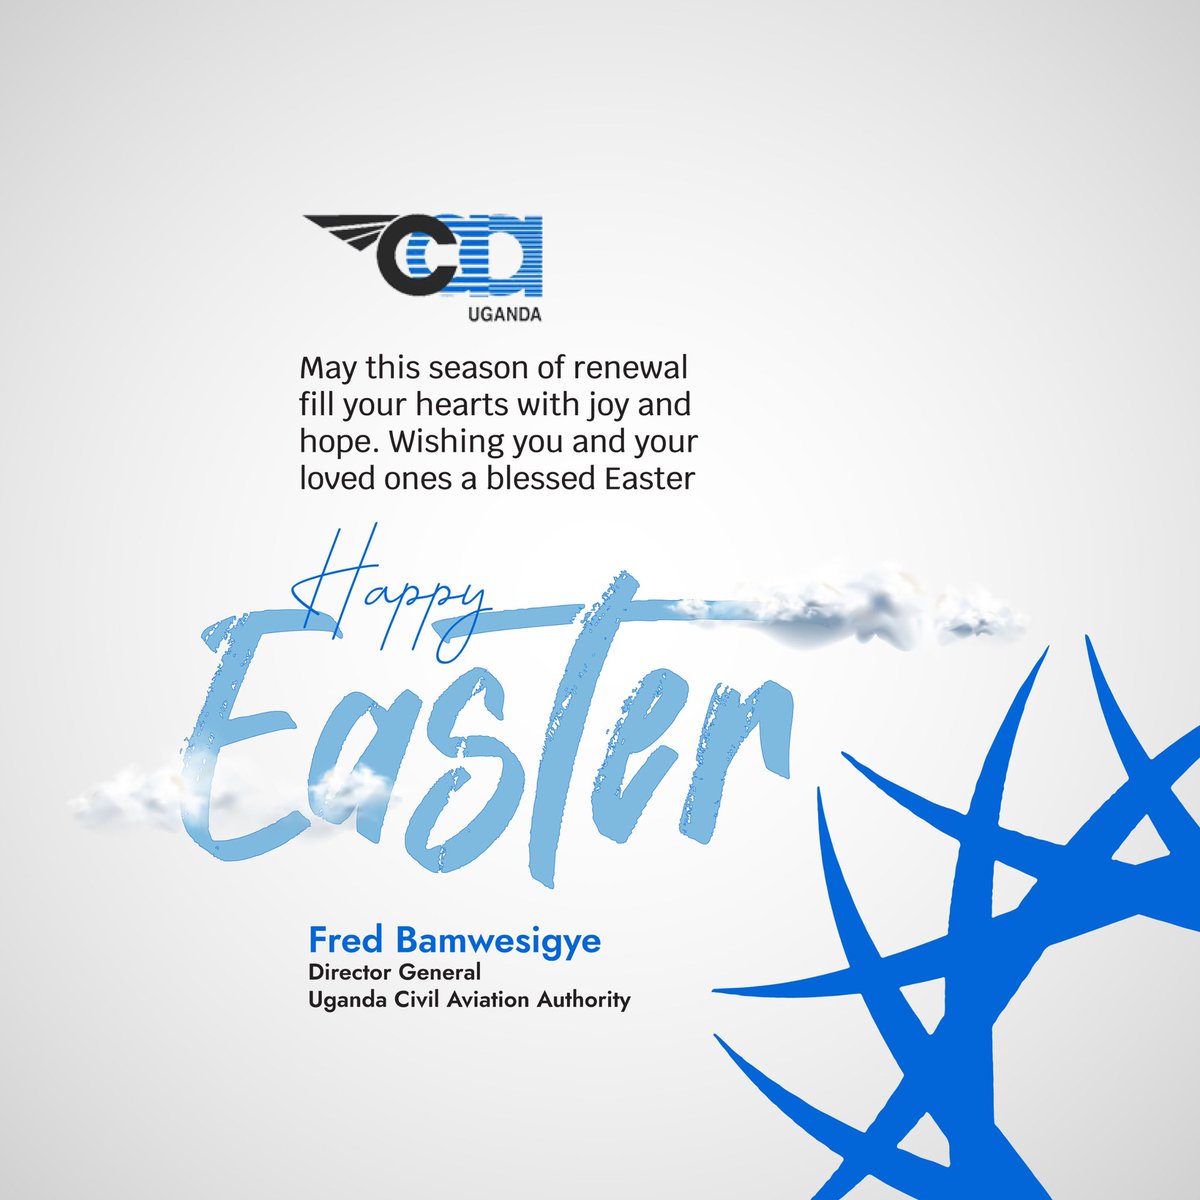 Happy Easter friends, may this season fill your hearts with joy and hope. #Easter